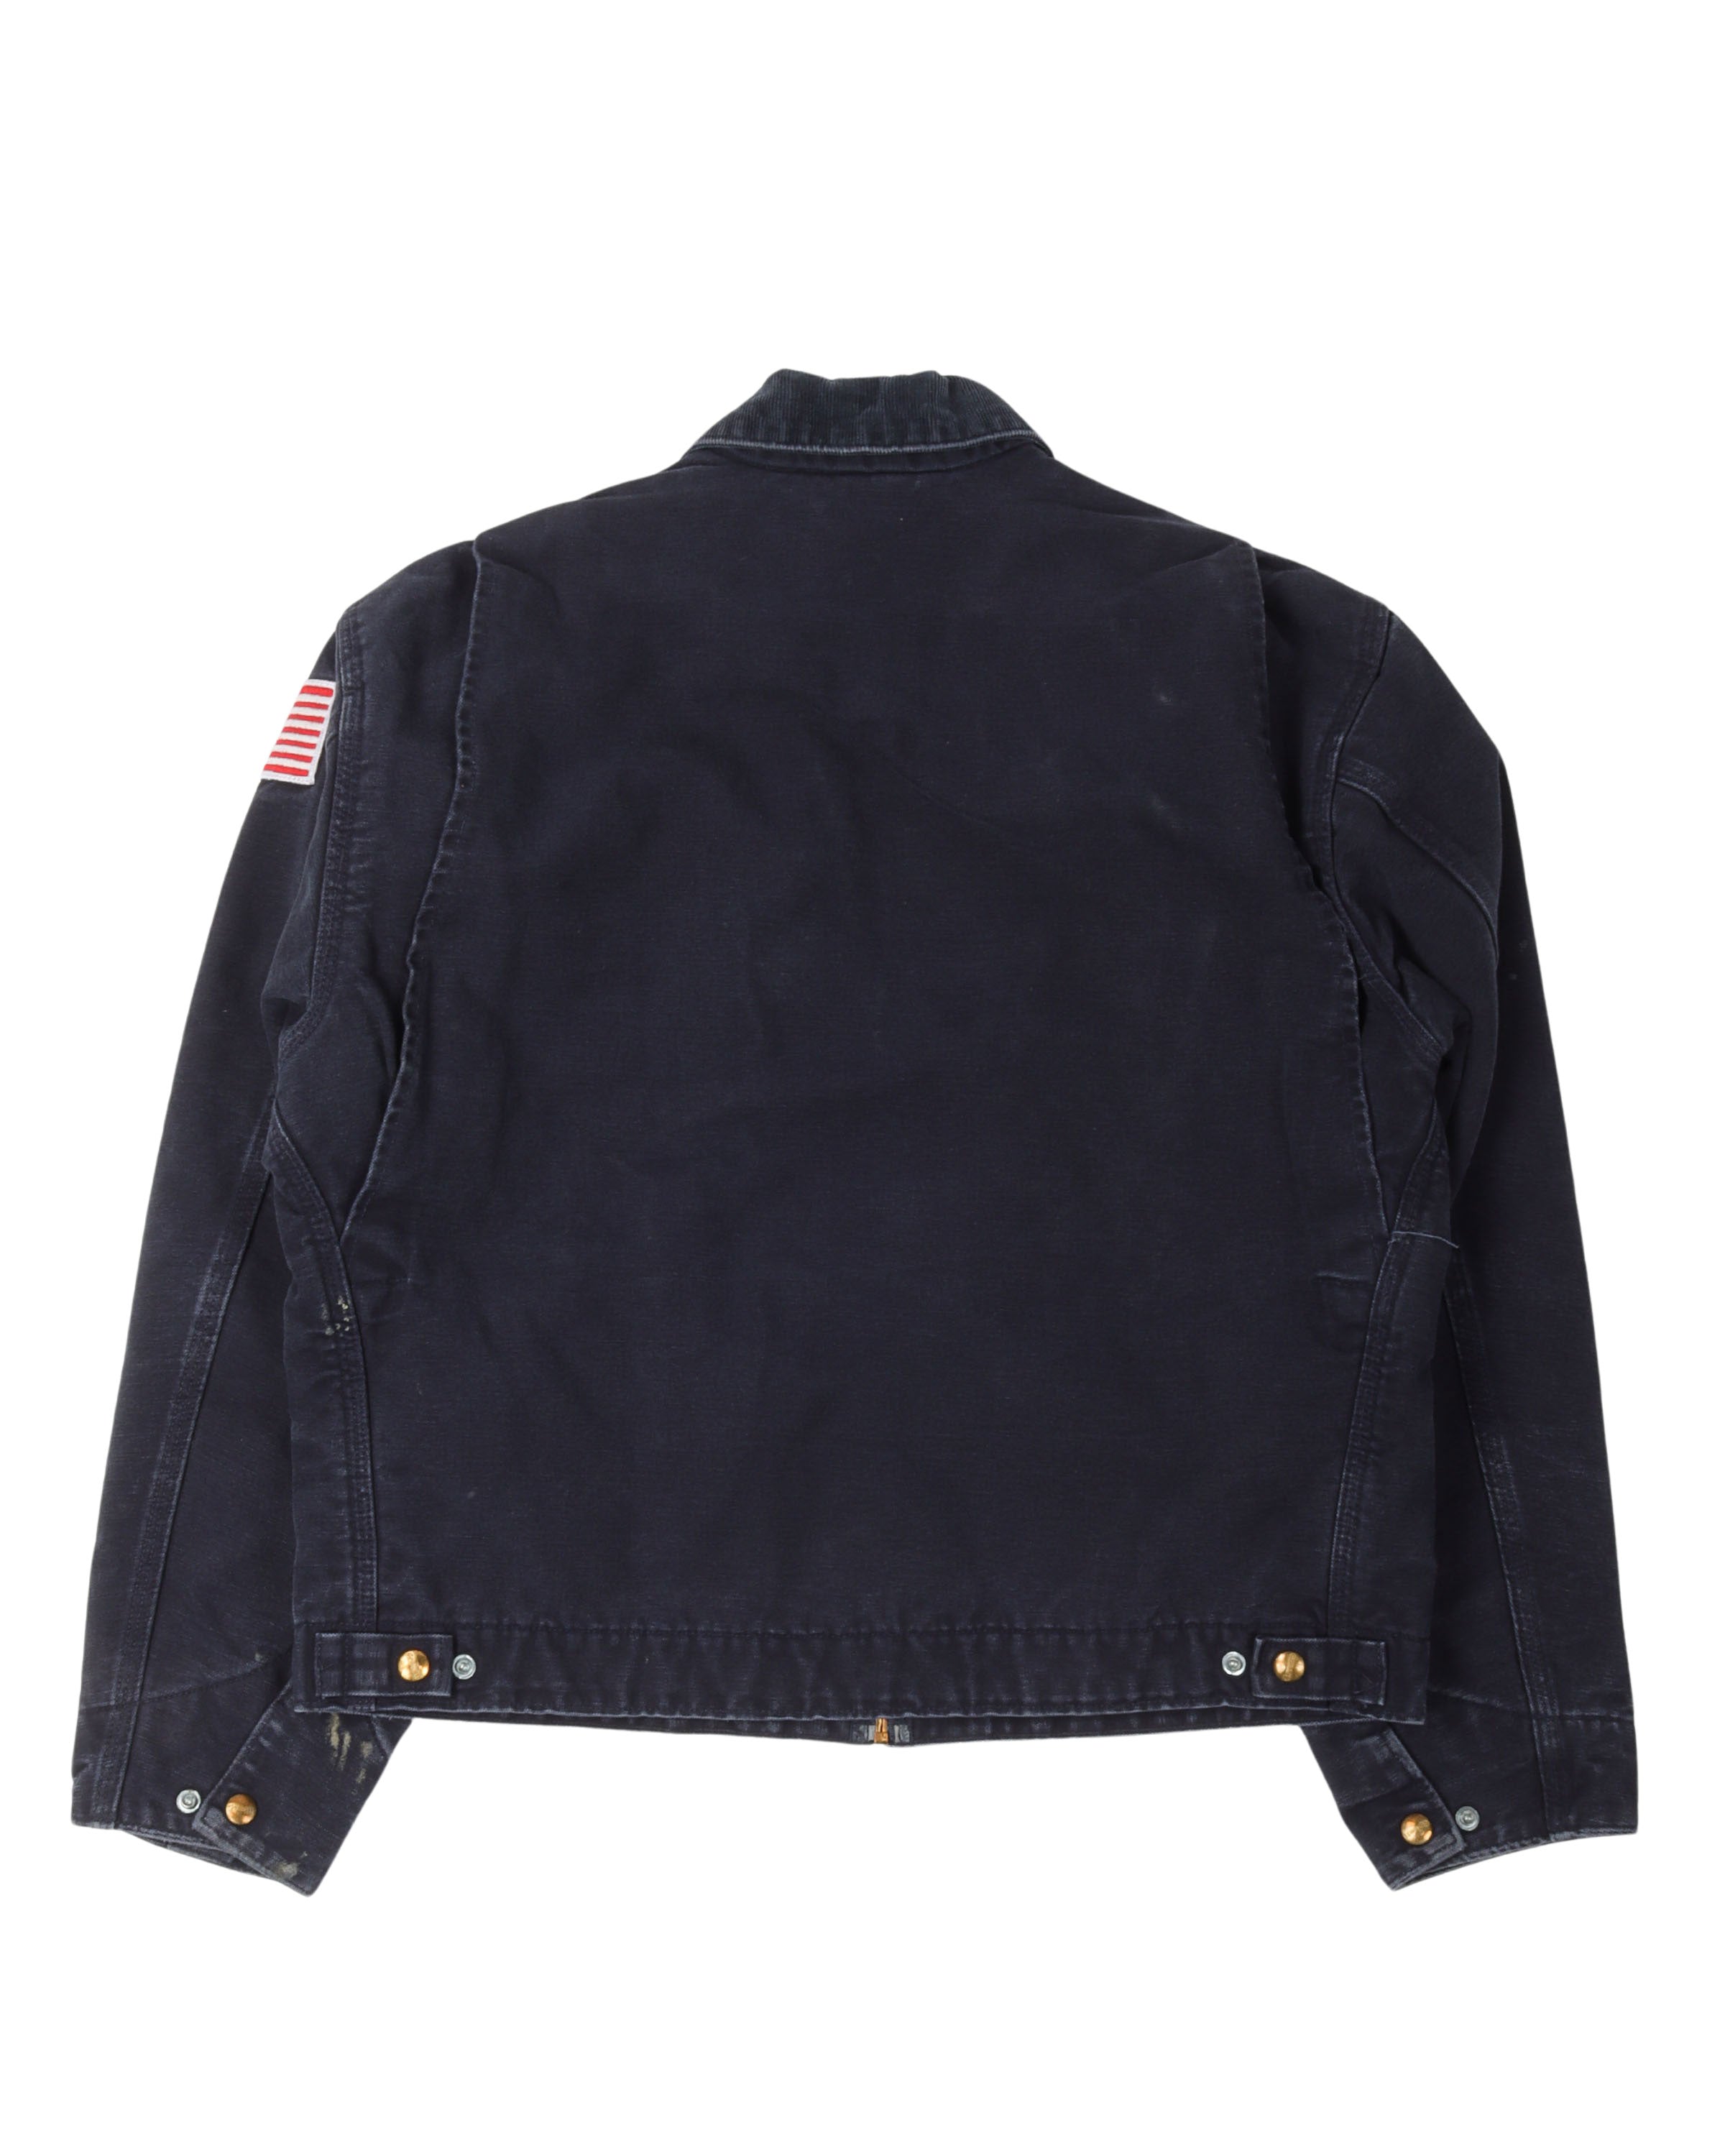 Carhartt Detroit Jacket with American Flag Patch